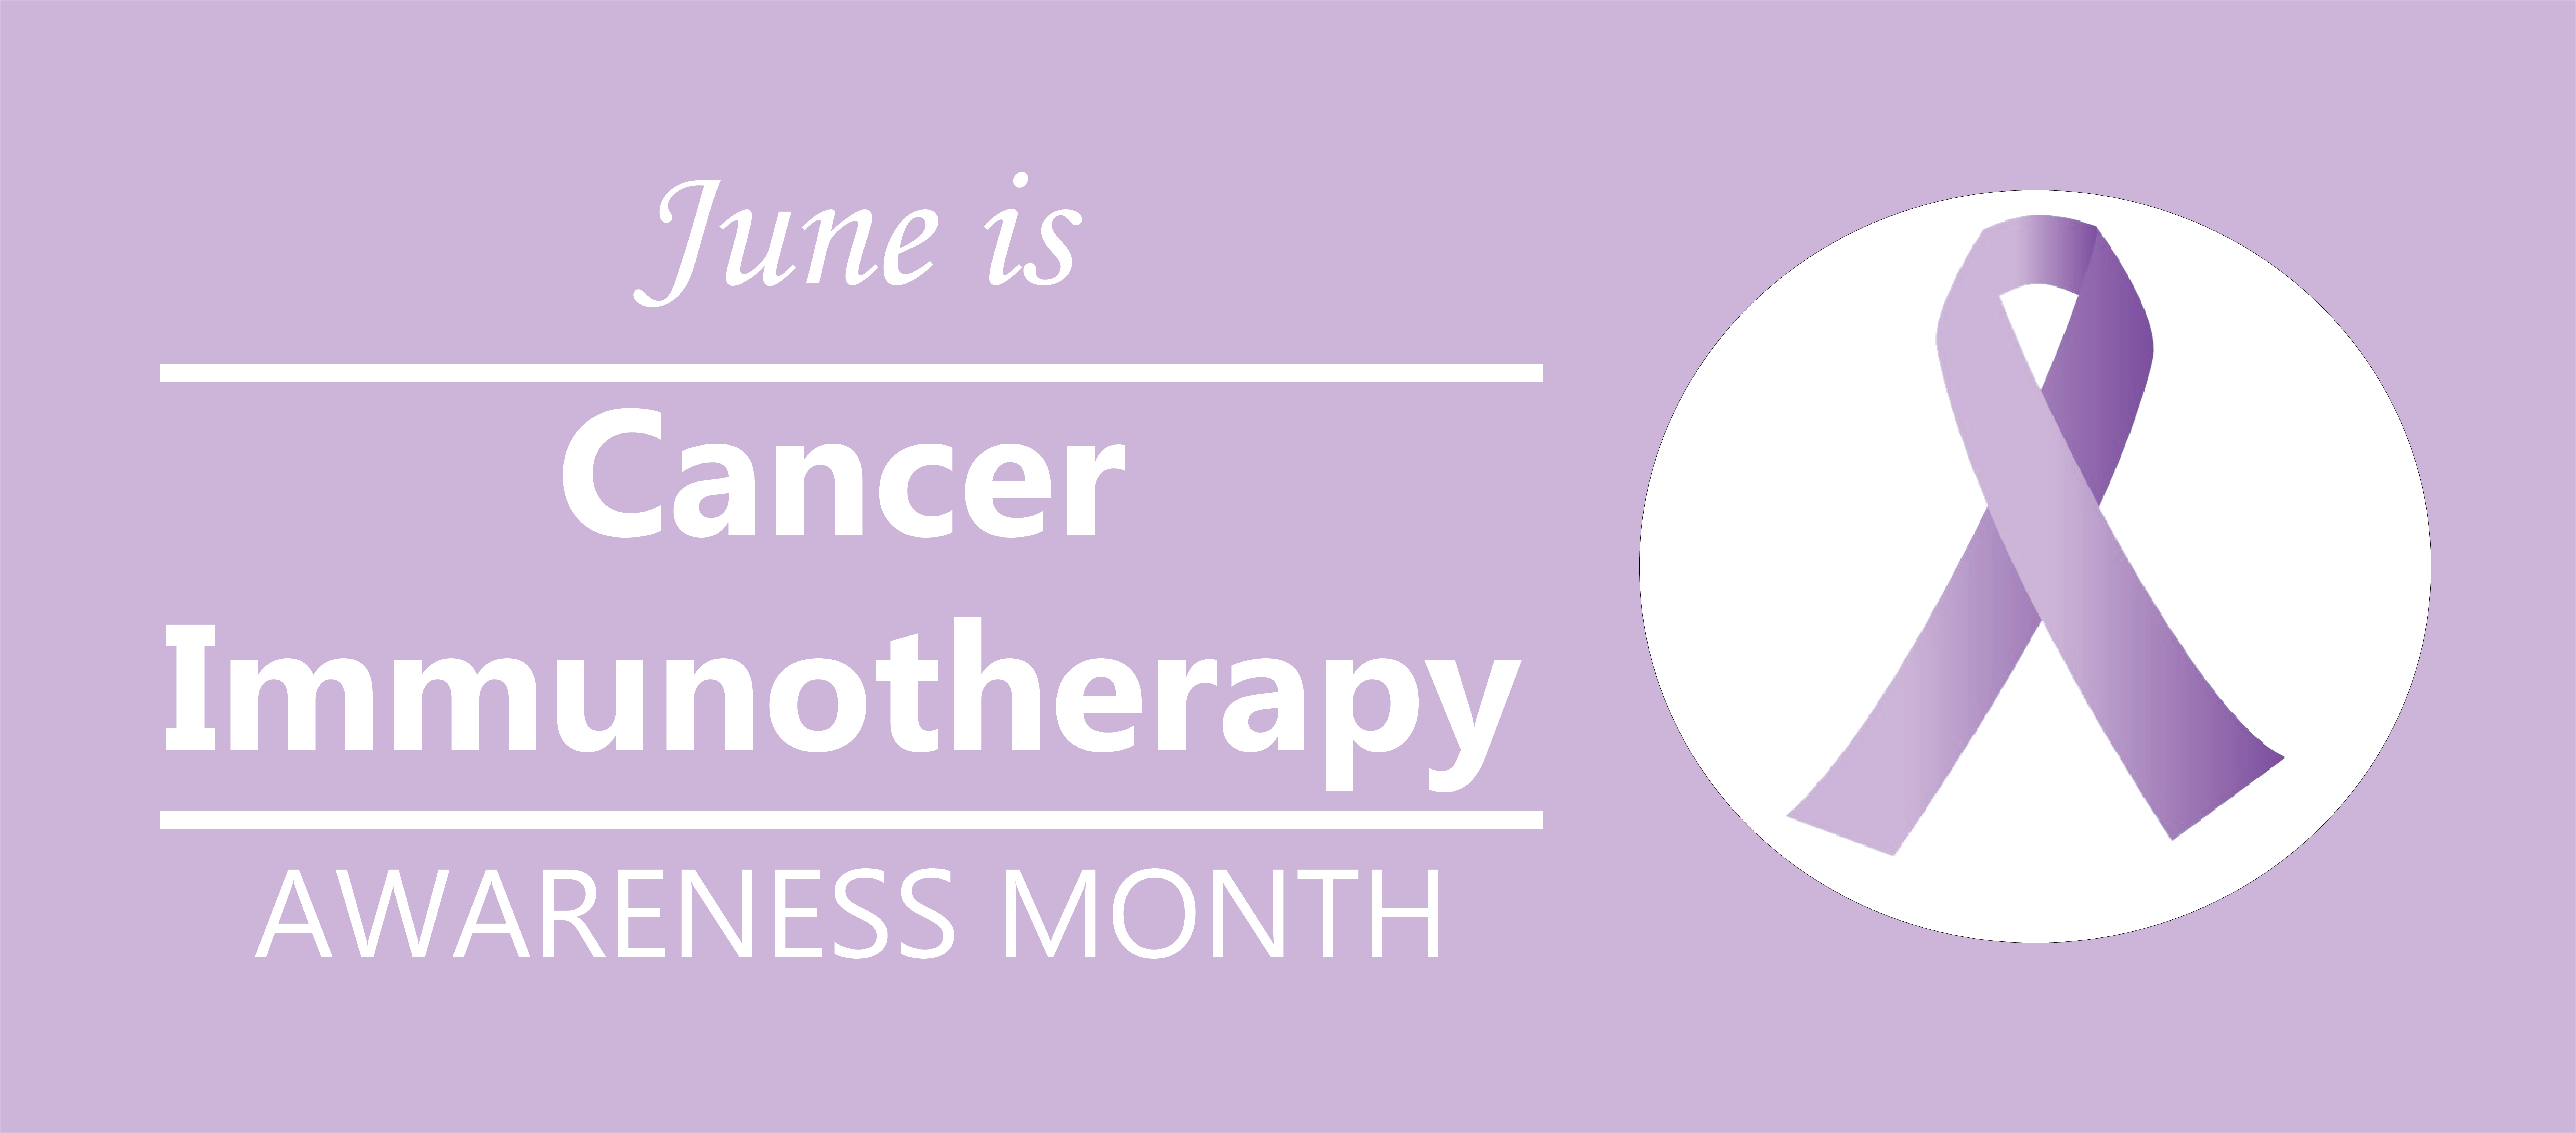 June is Cancer Immunotherapy Awareness Month